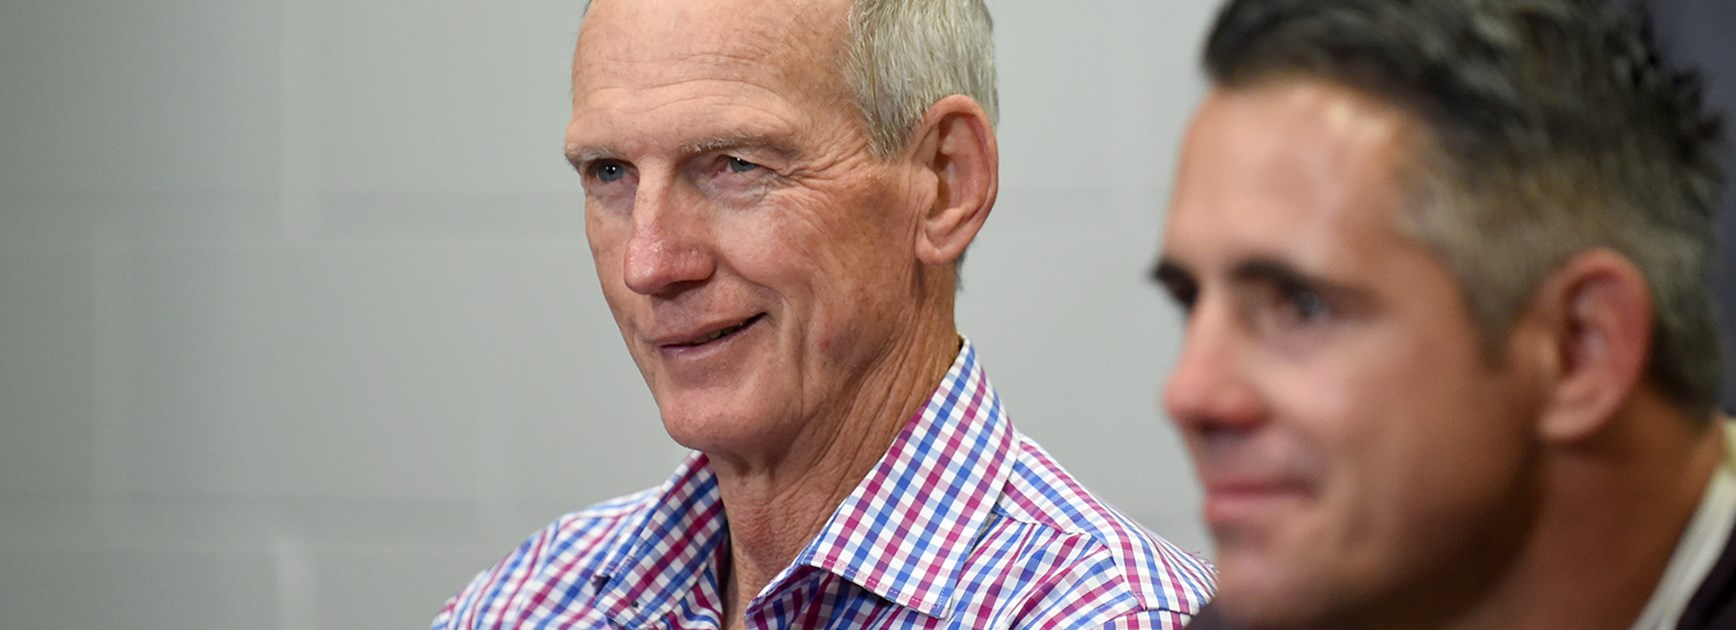 Broncos coach Wayne Bennett was all smiles after his side's elimination final win over the Titans.